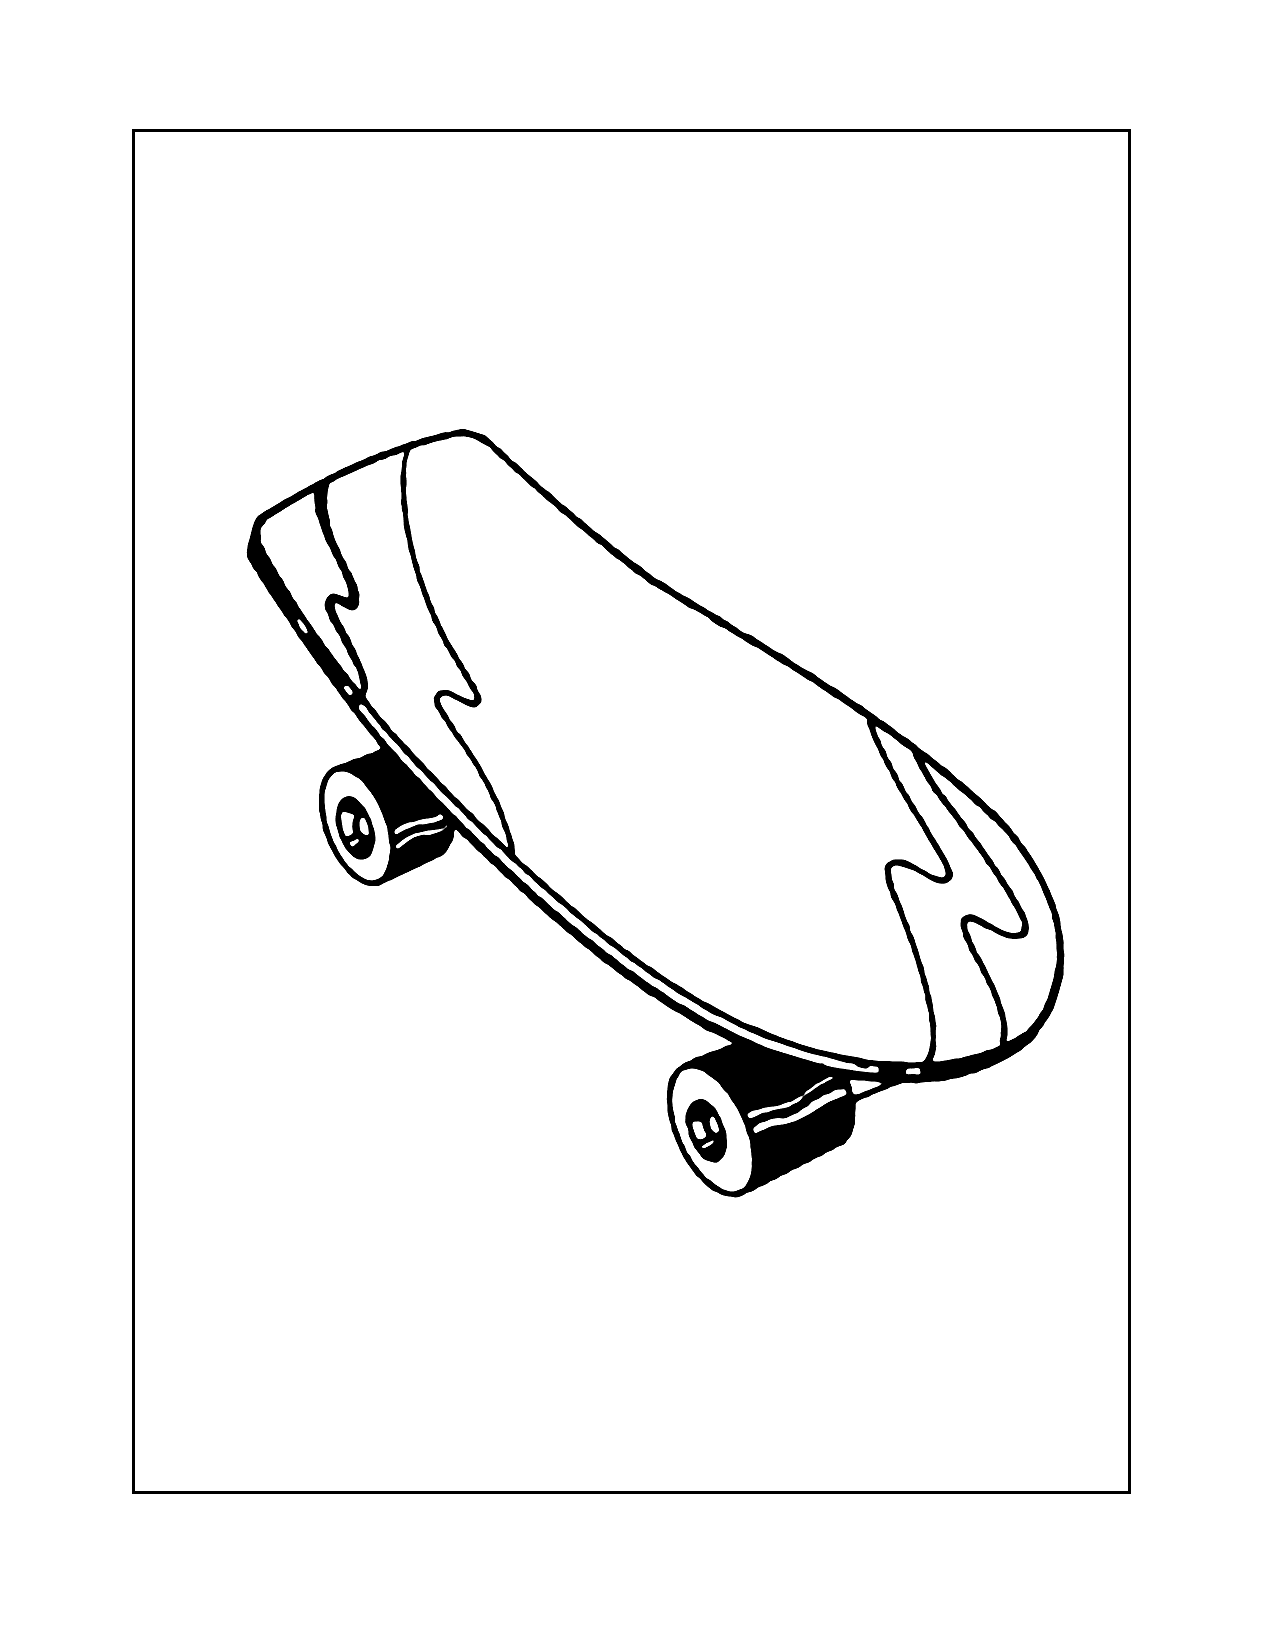 Easy Skateboad Coloring Page